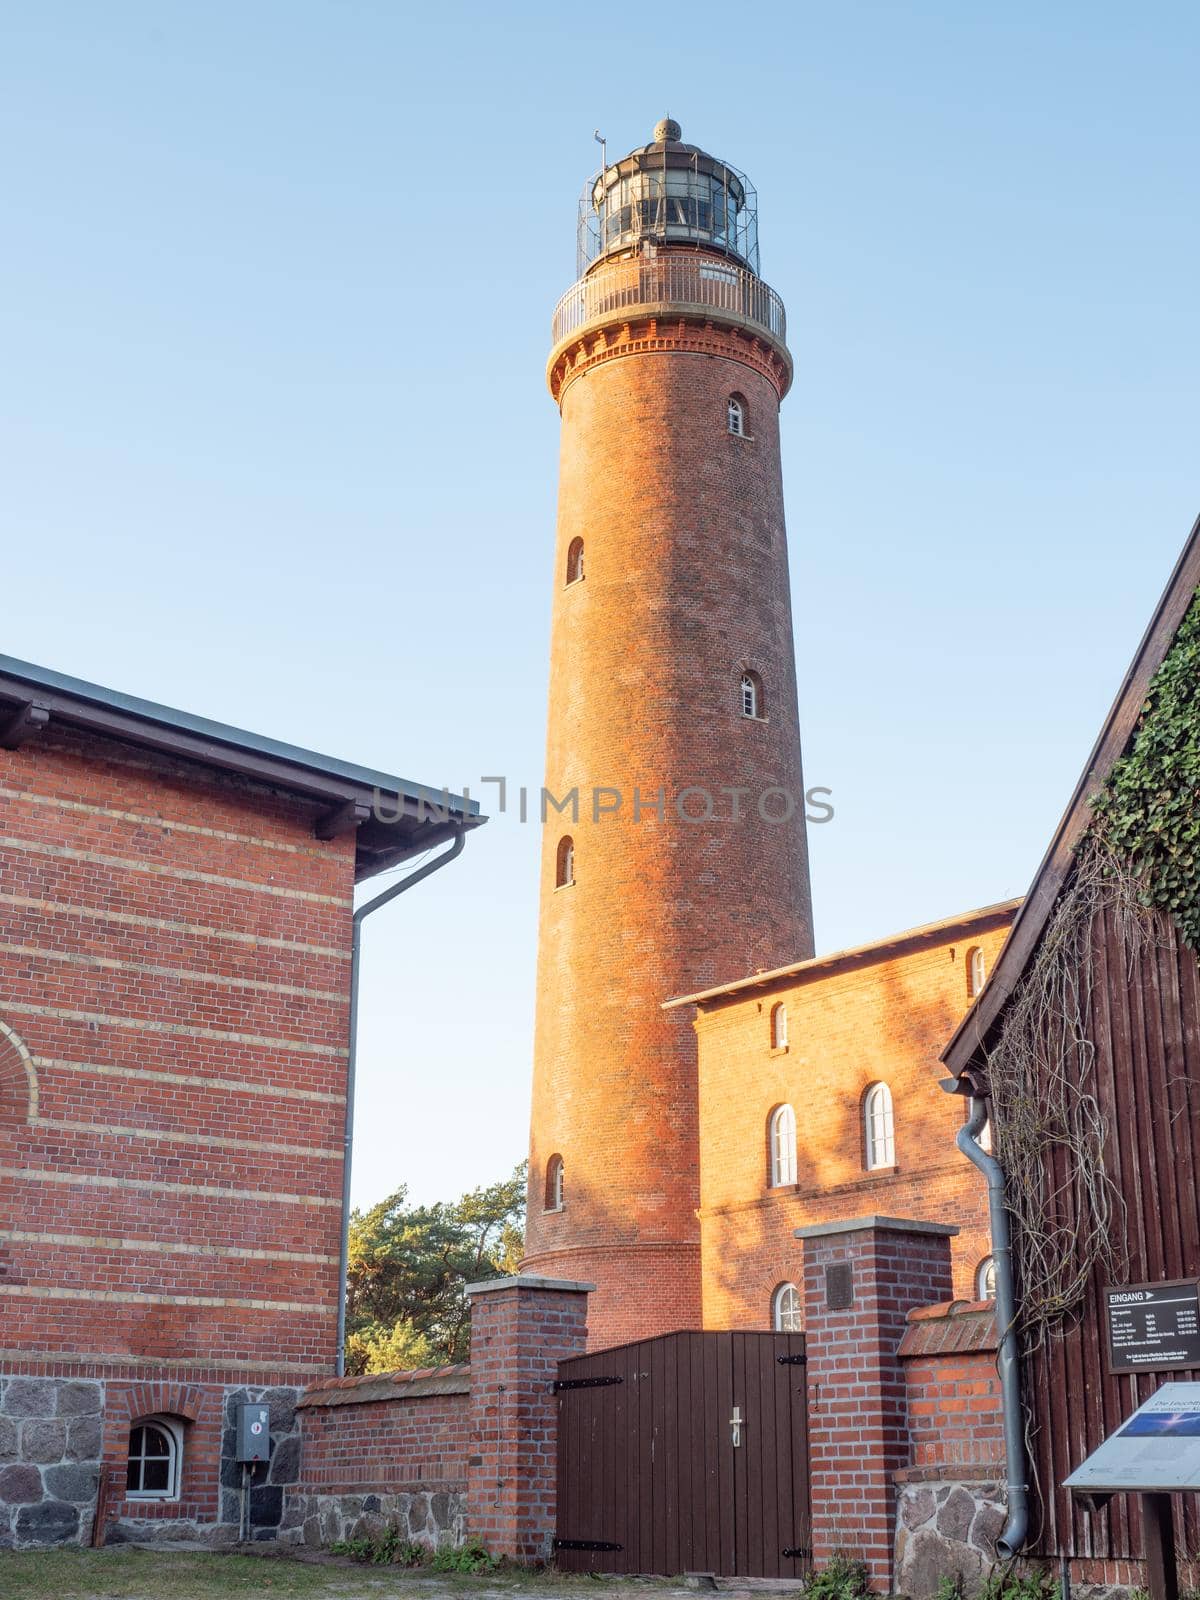 Ort Lighthouse tower near Prerow built from red bricks. Popular nature reservation by rdonar2